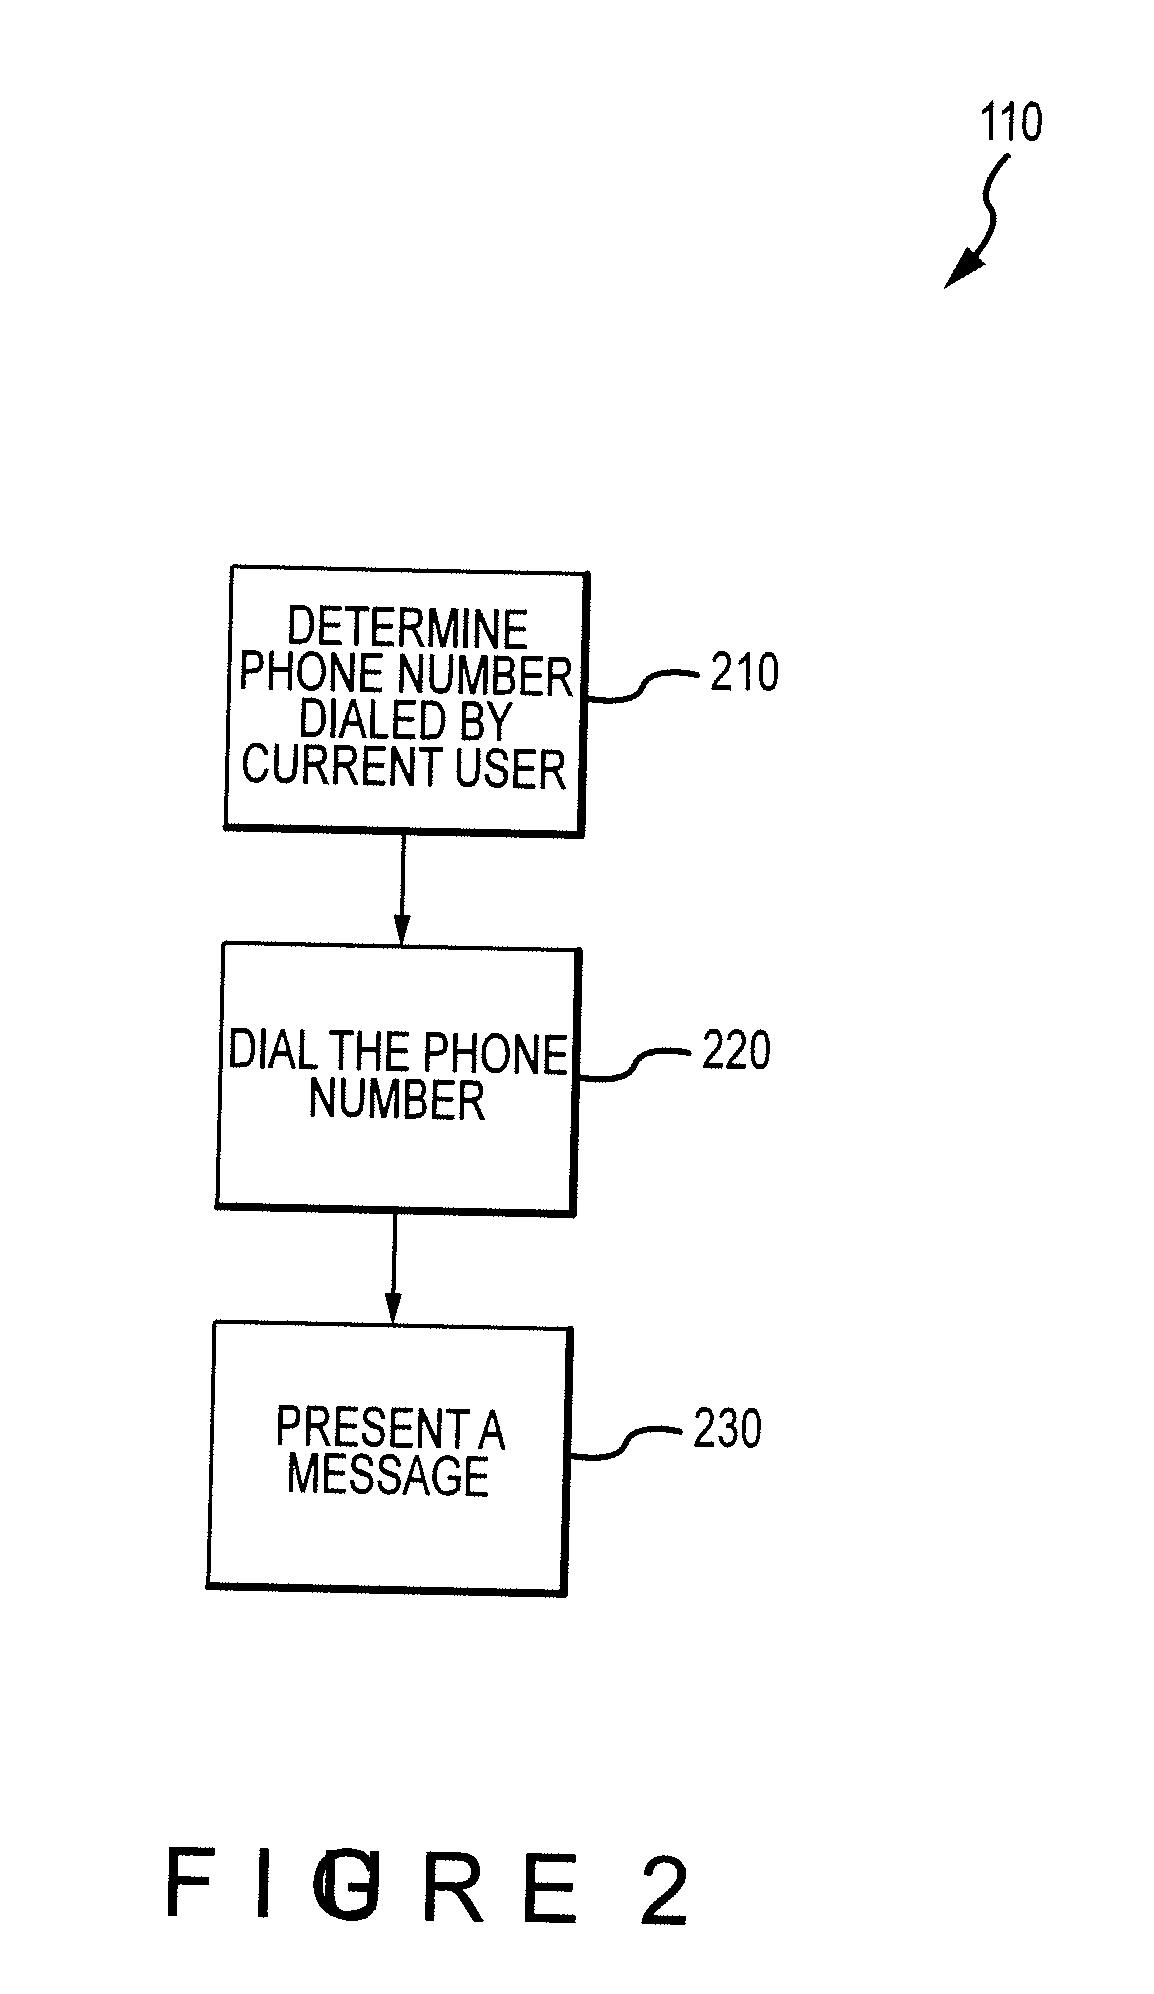 System for mitigating the unauthorized use of a device